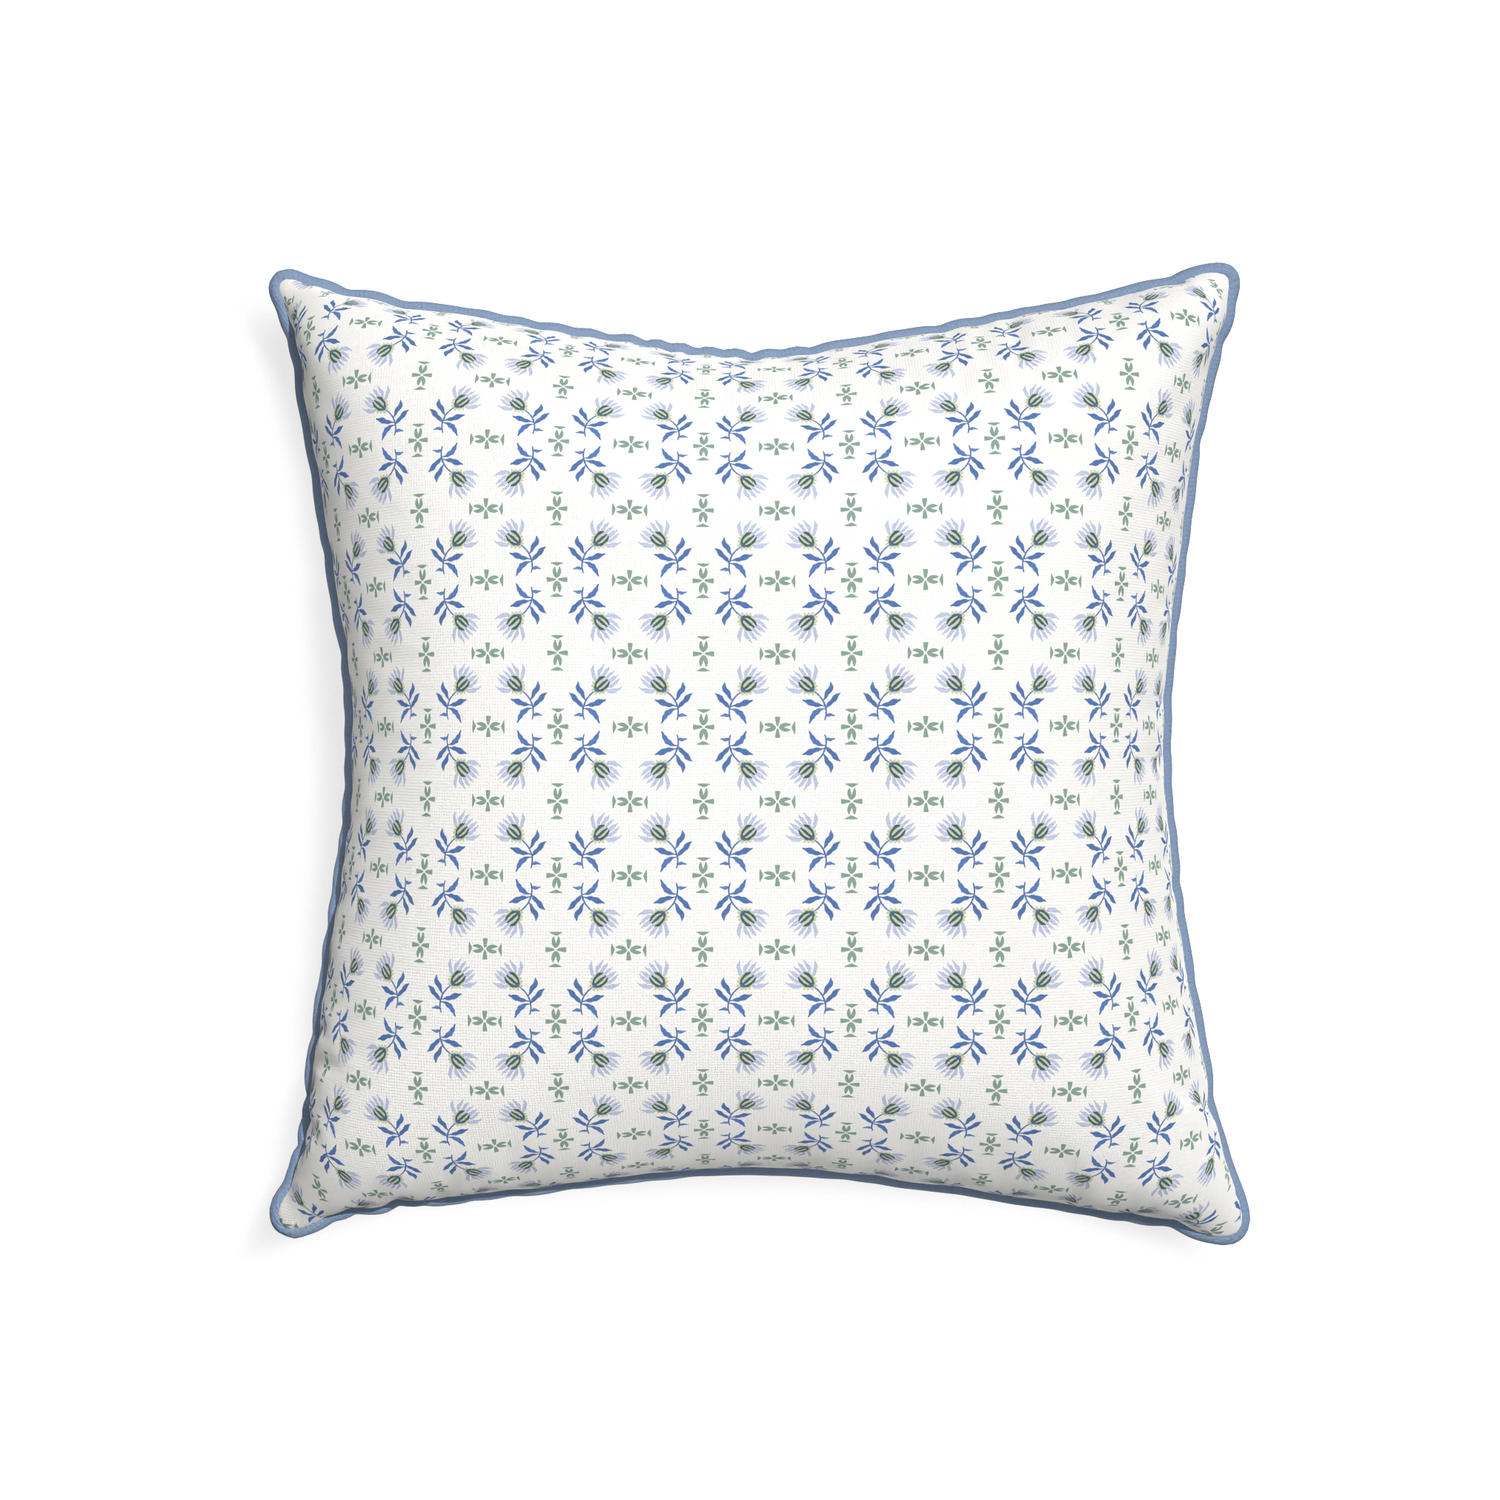 22-square lee custom blue & green floralpillow with sky piping on white background